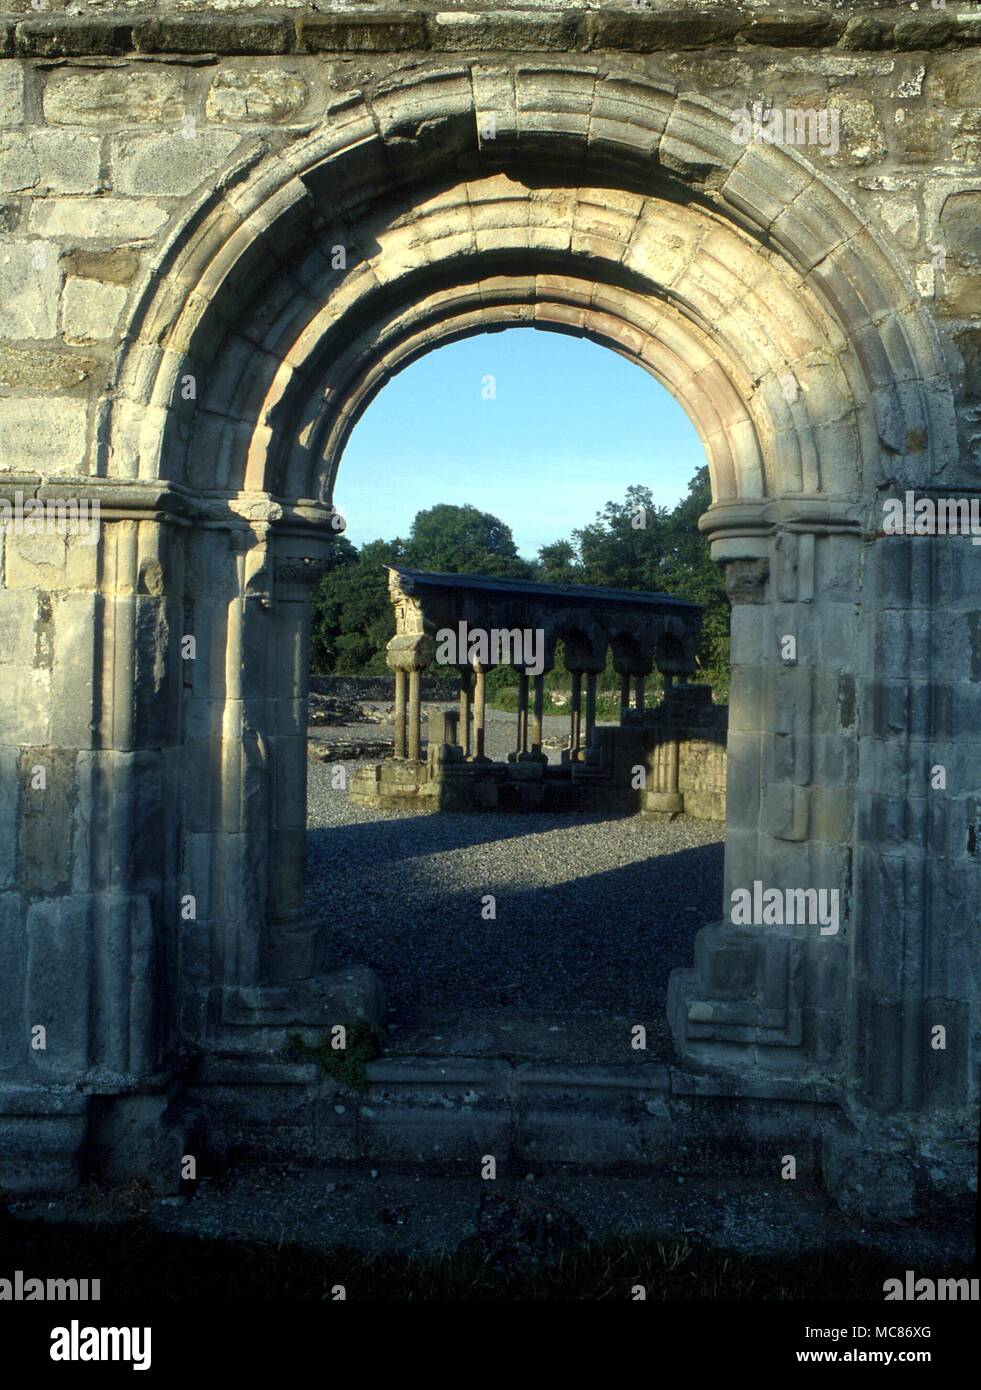 PREDICTIONS AND PROPHECY Malachai Remains of the abbey at Mellifont (Ireland)  built by Saint Malacha (Mael-Maedoc ua Morgair, 1095-1148). He may have  written his famous Papal Prophecies here, listing the 'symbols' of